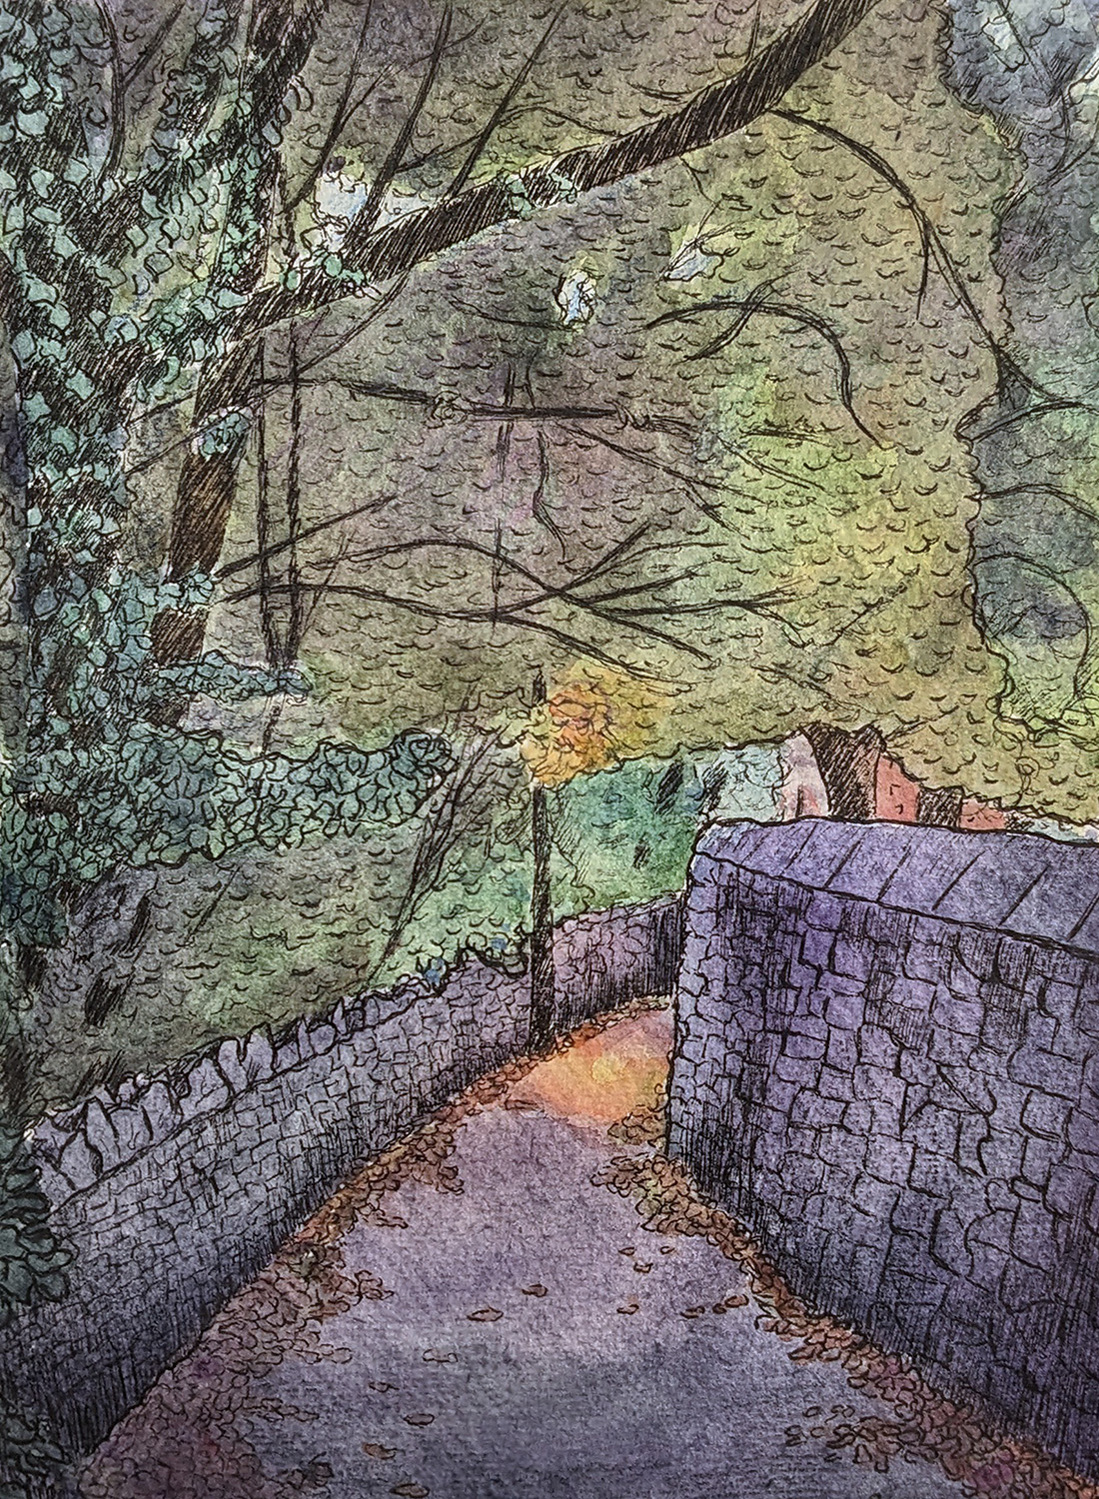 A painting of a path with stone walls either side and with a lamppost illuminating the ground. Trees are leaning over the left side of the image with green and brown leaves. There are orange leaves on the floor. 